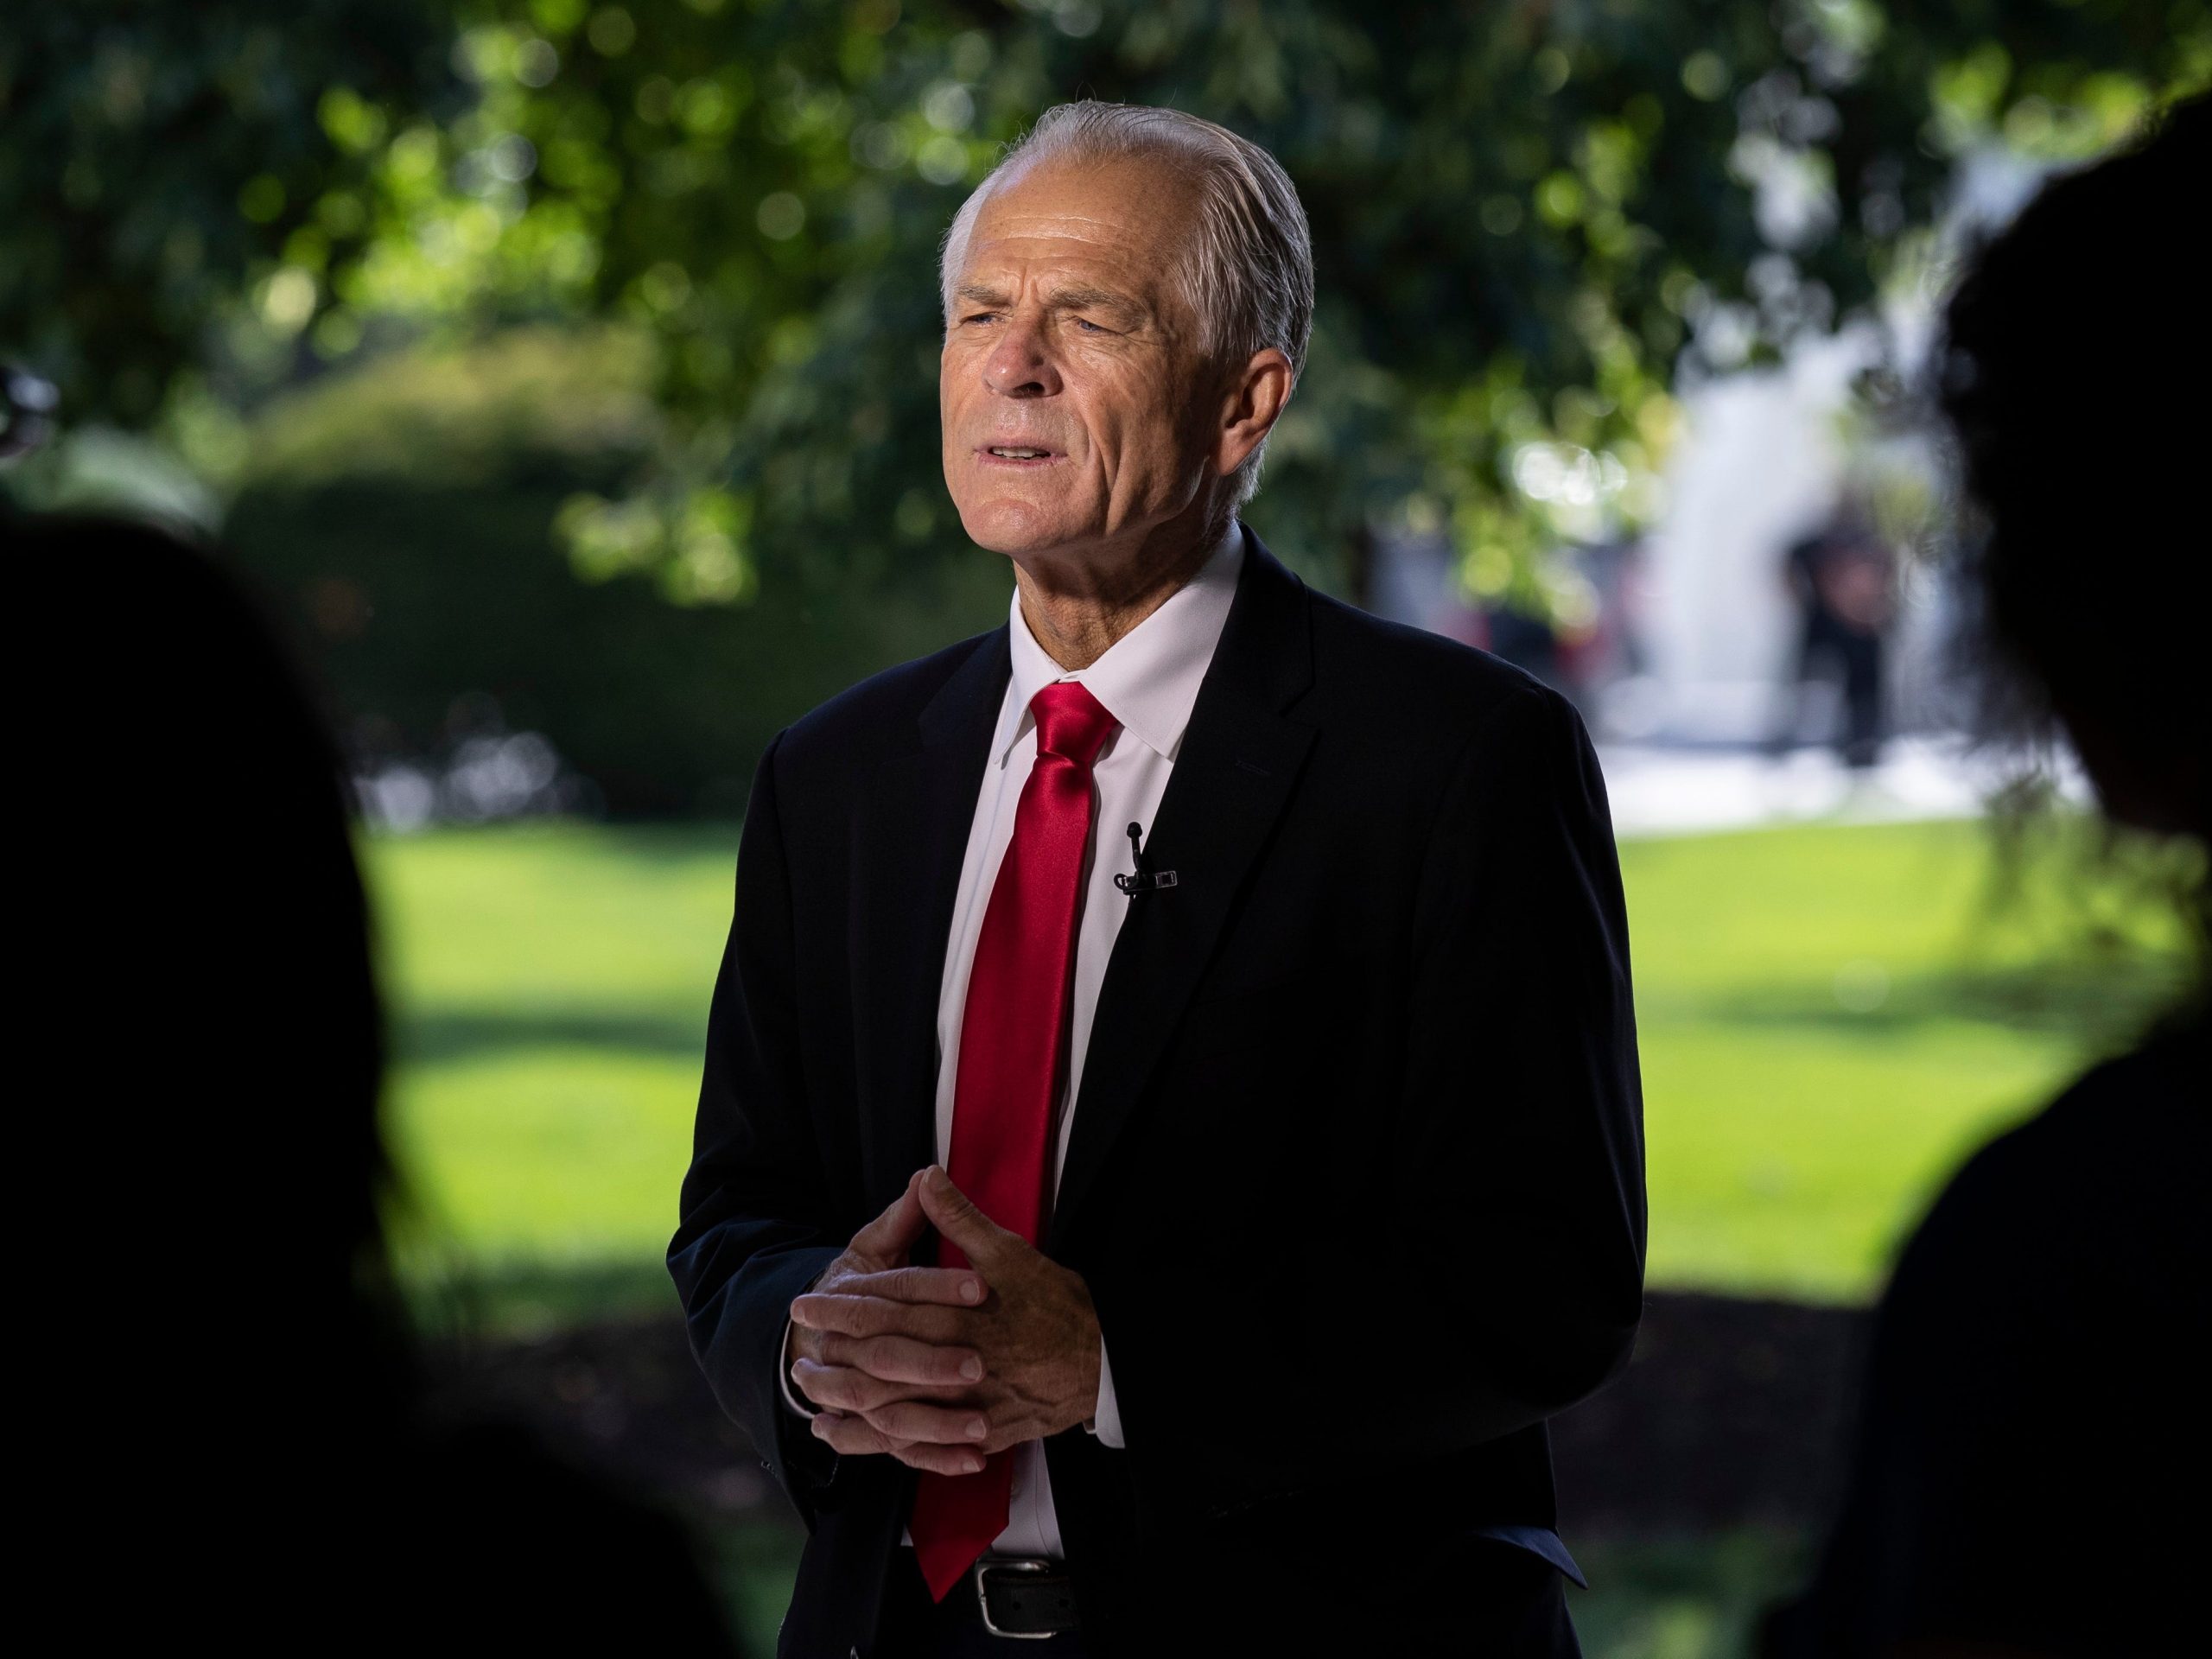 White House trade adviser Peter Navarro stands before a television interview at the White House, Monday, Aug. 3, 2020, in Washington.